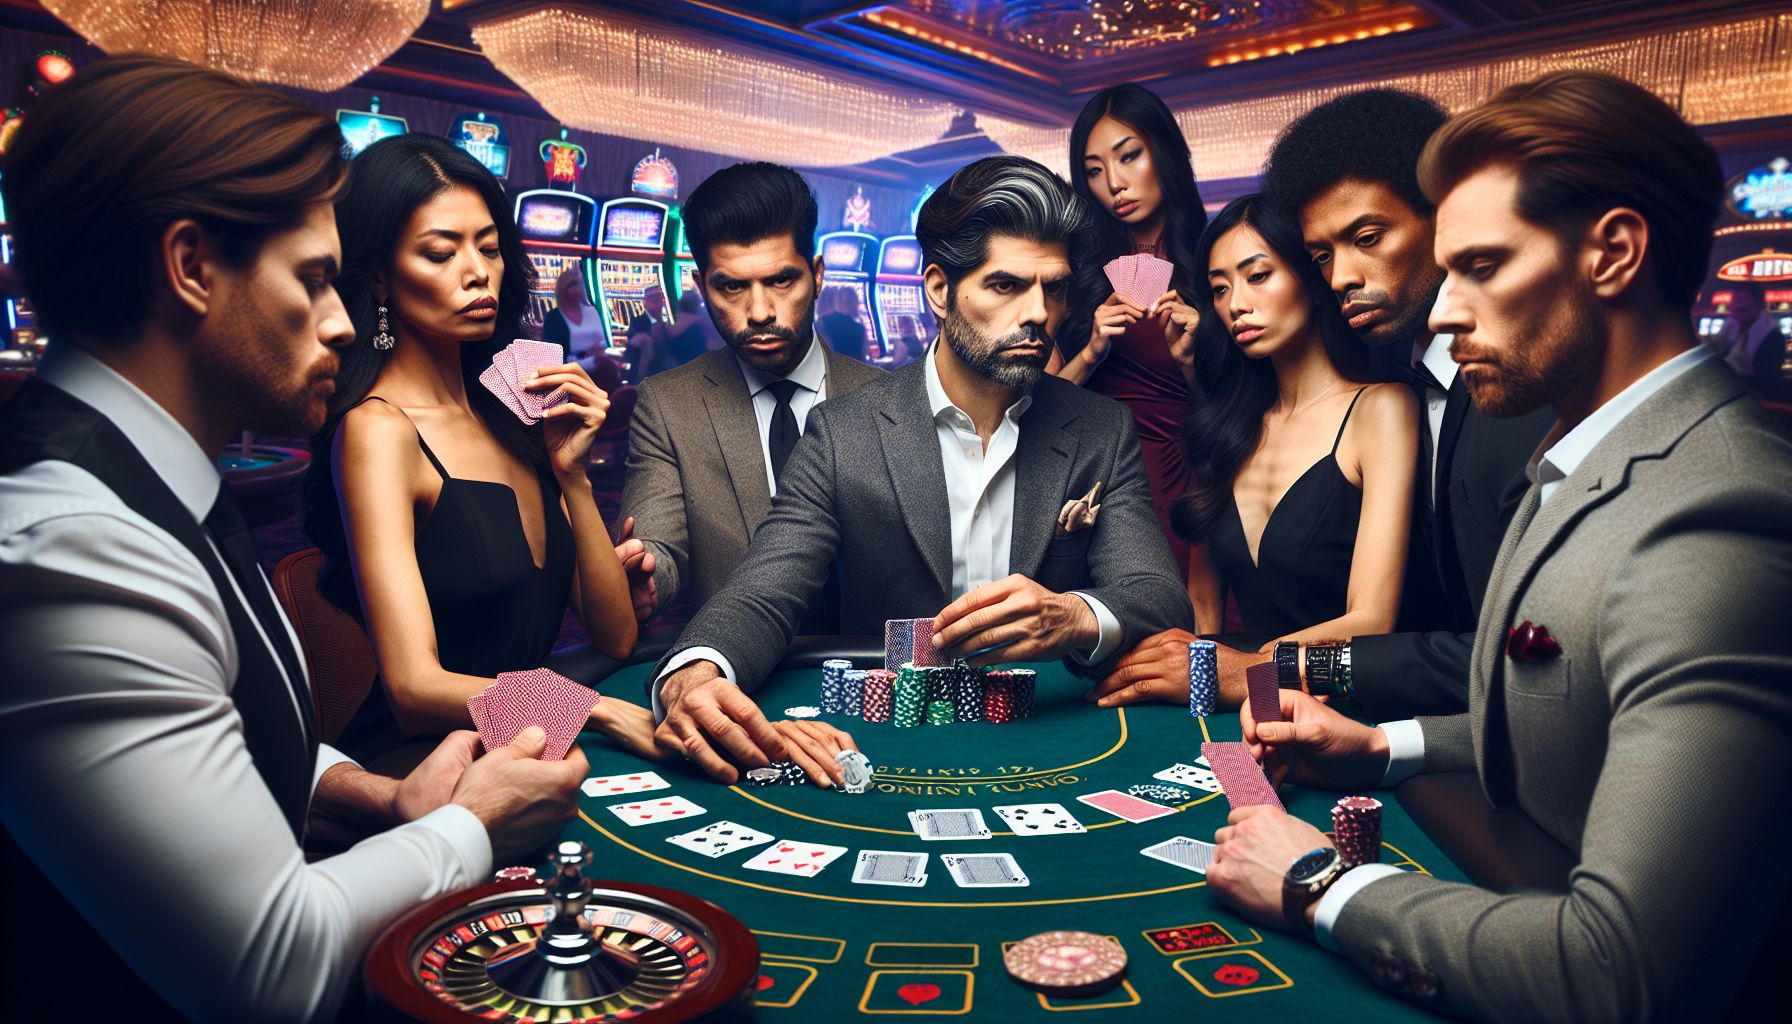 High Stakes & Full Houses: The Thrill of Casino Poker